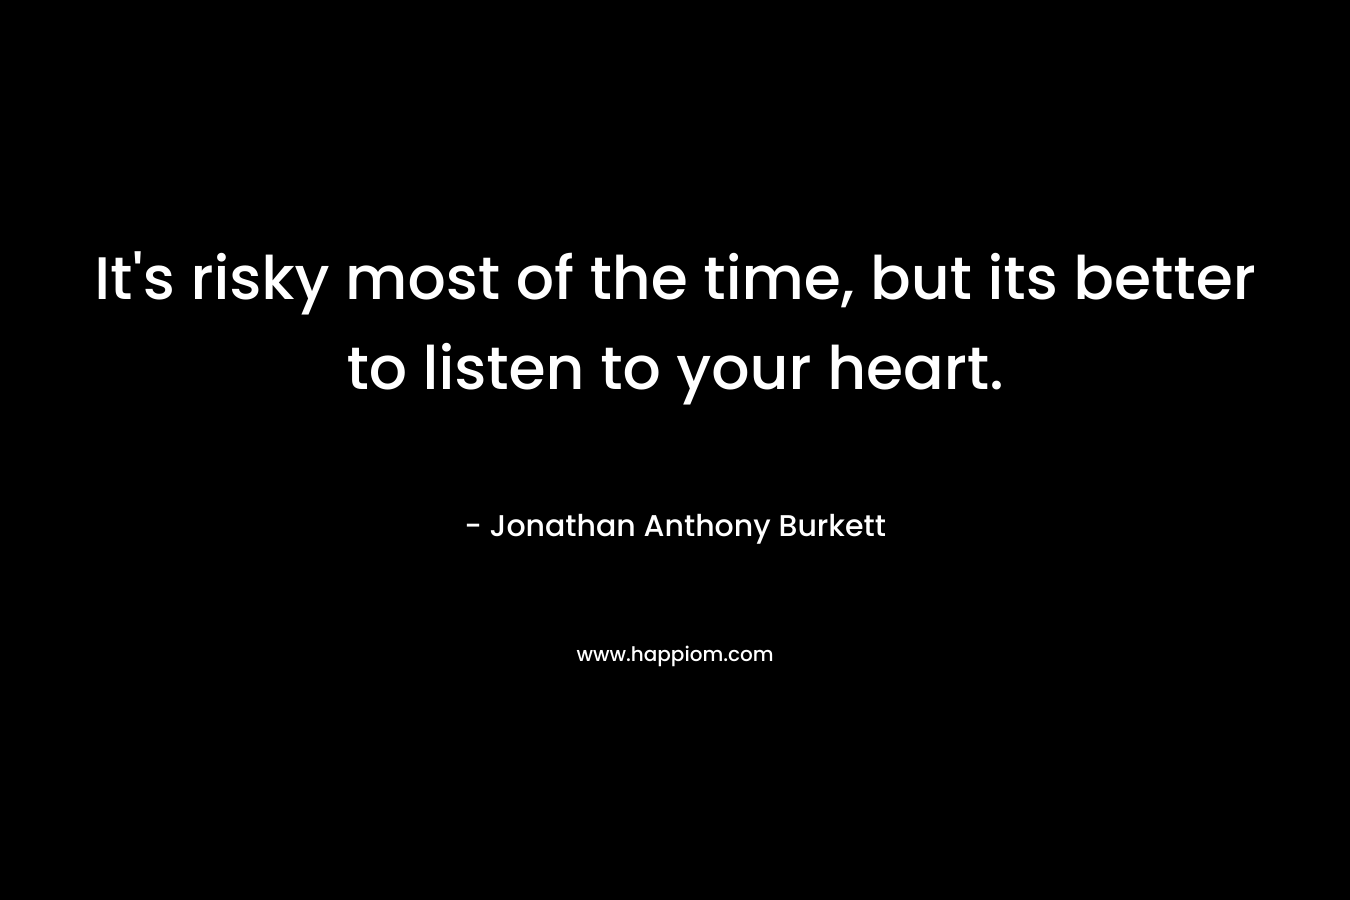 It’s risky most of the time, but its better to listen to your heart. – Jonathan Anthony Burkett